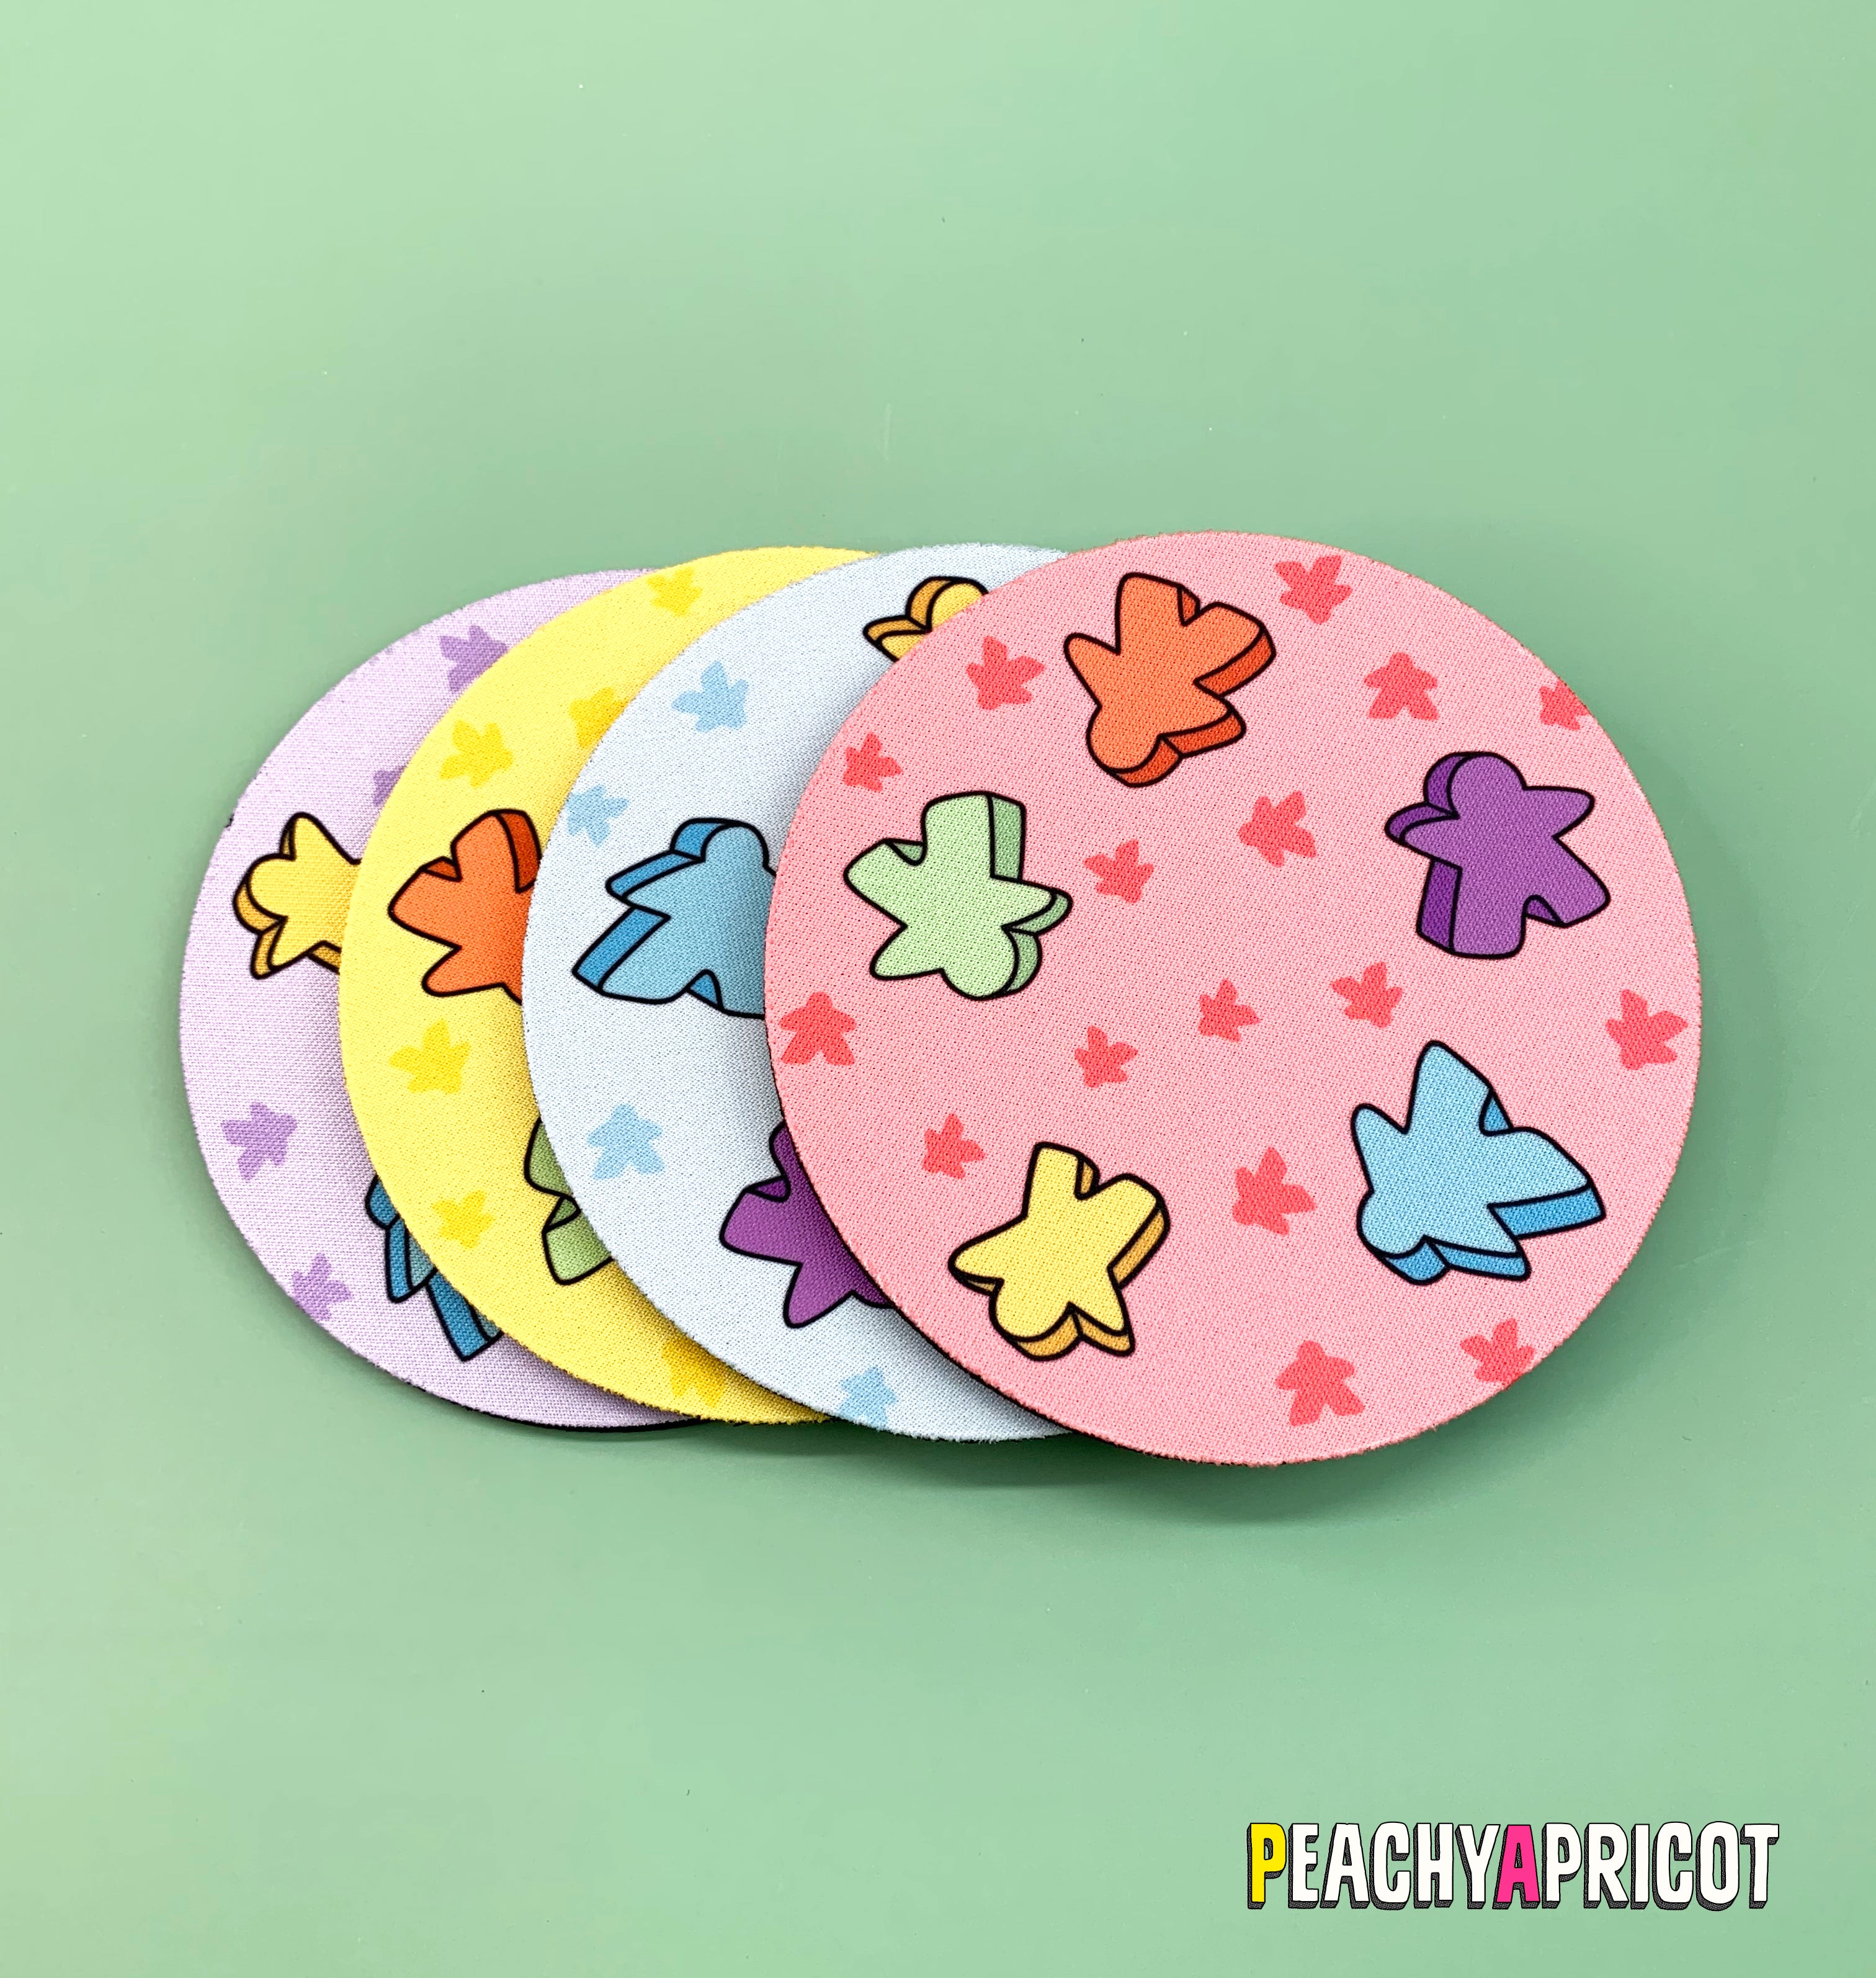 set of 4 board game inspired coasters with meeples printed all over them in different colors